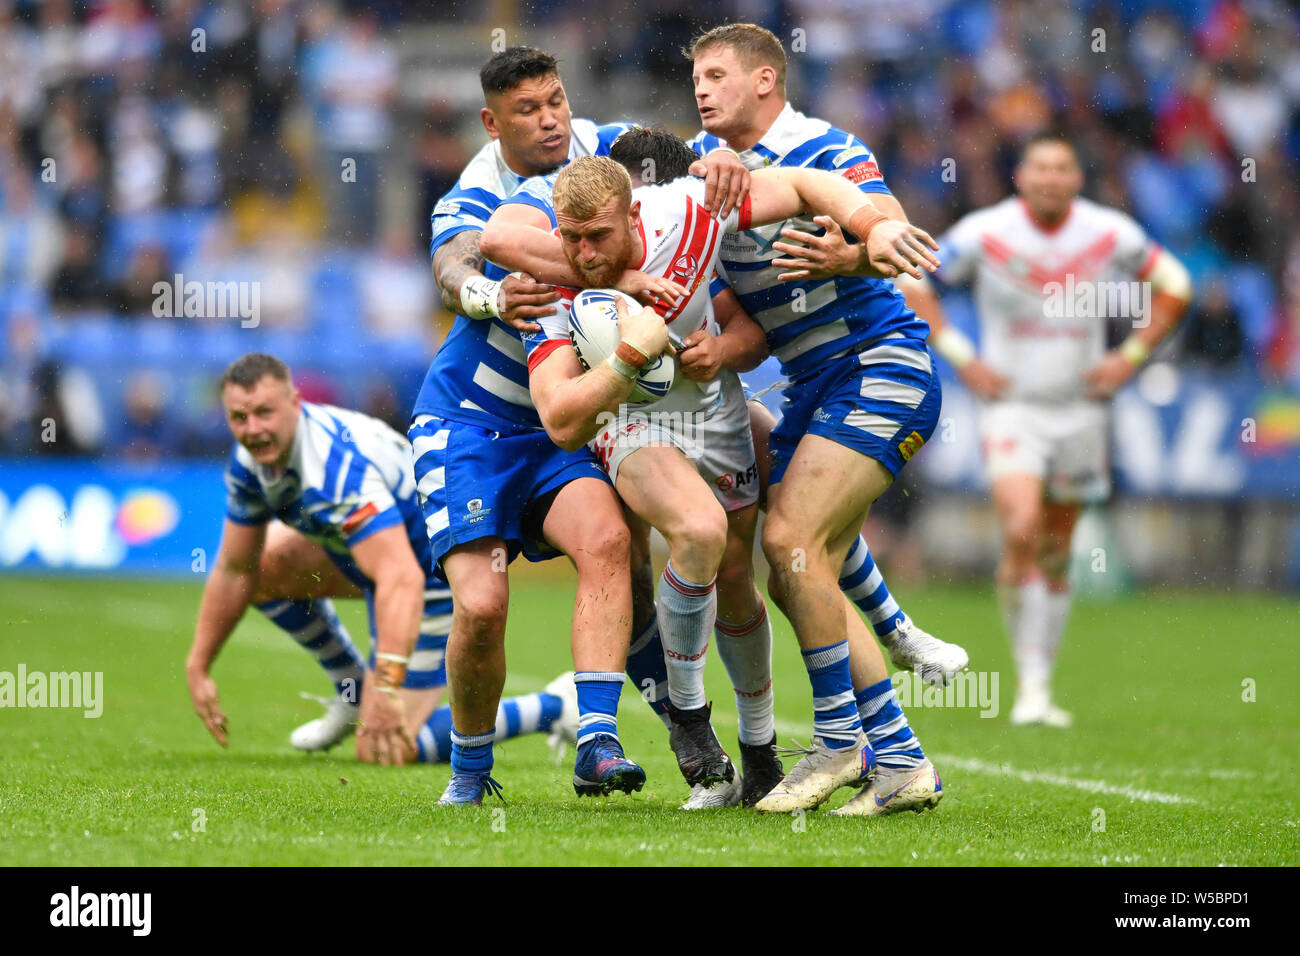 Bolton, UK. 27th July, 2019. Coral Challenge Cup Semi Final St Helens versus Halifax; Jack Ashworth of St Helens forces his way through the Halifax RLFC defensive line Credit: Action Plus Sports Images/Alamy Live News Stock Photo